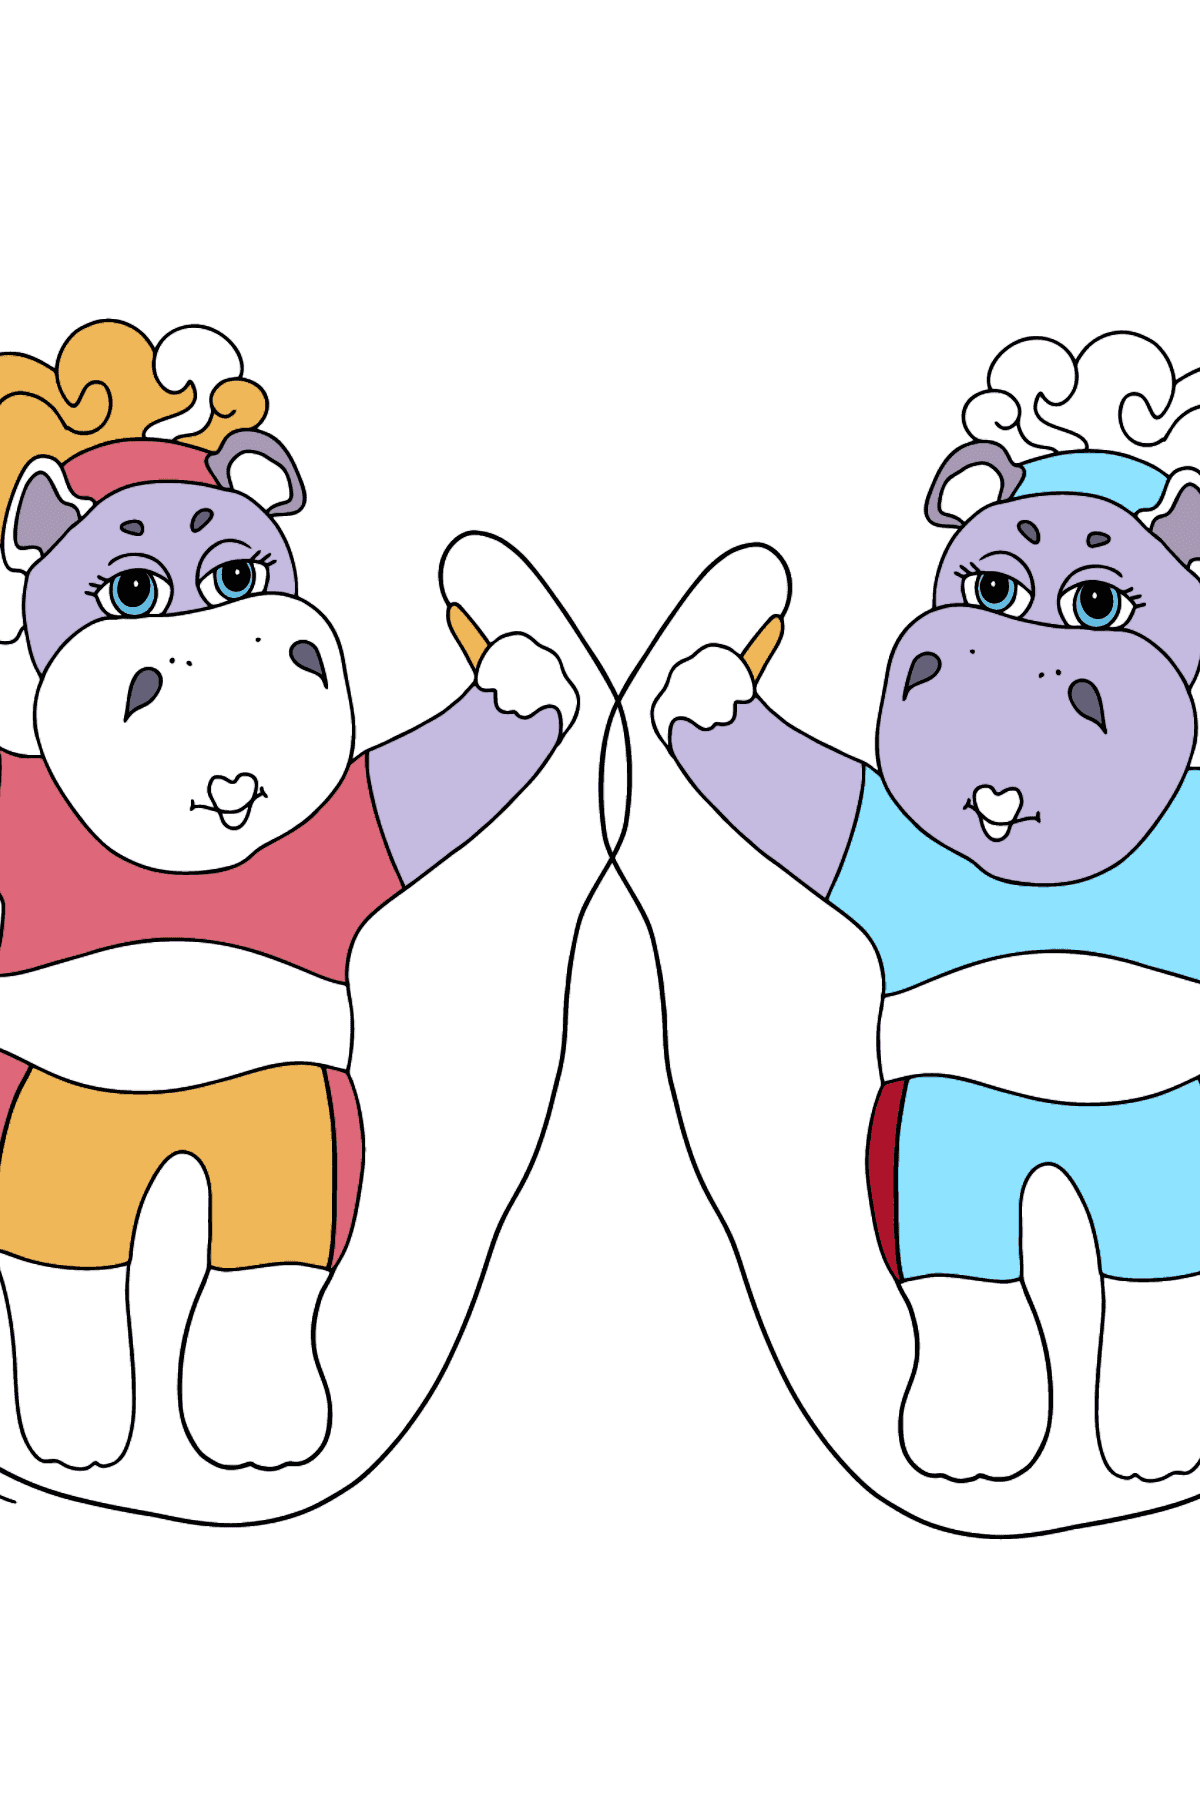 Funny Hippos (difficult) coloring page - Coloring Pages for Kids